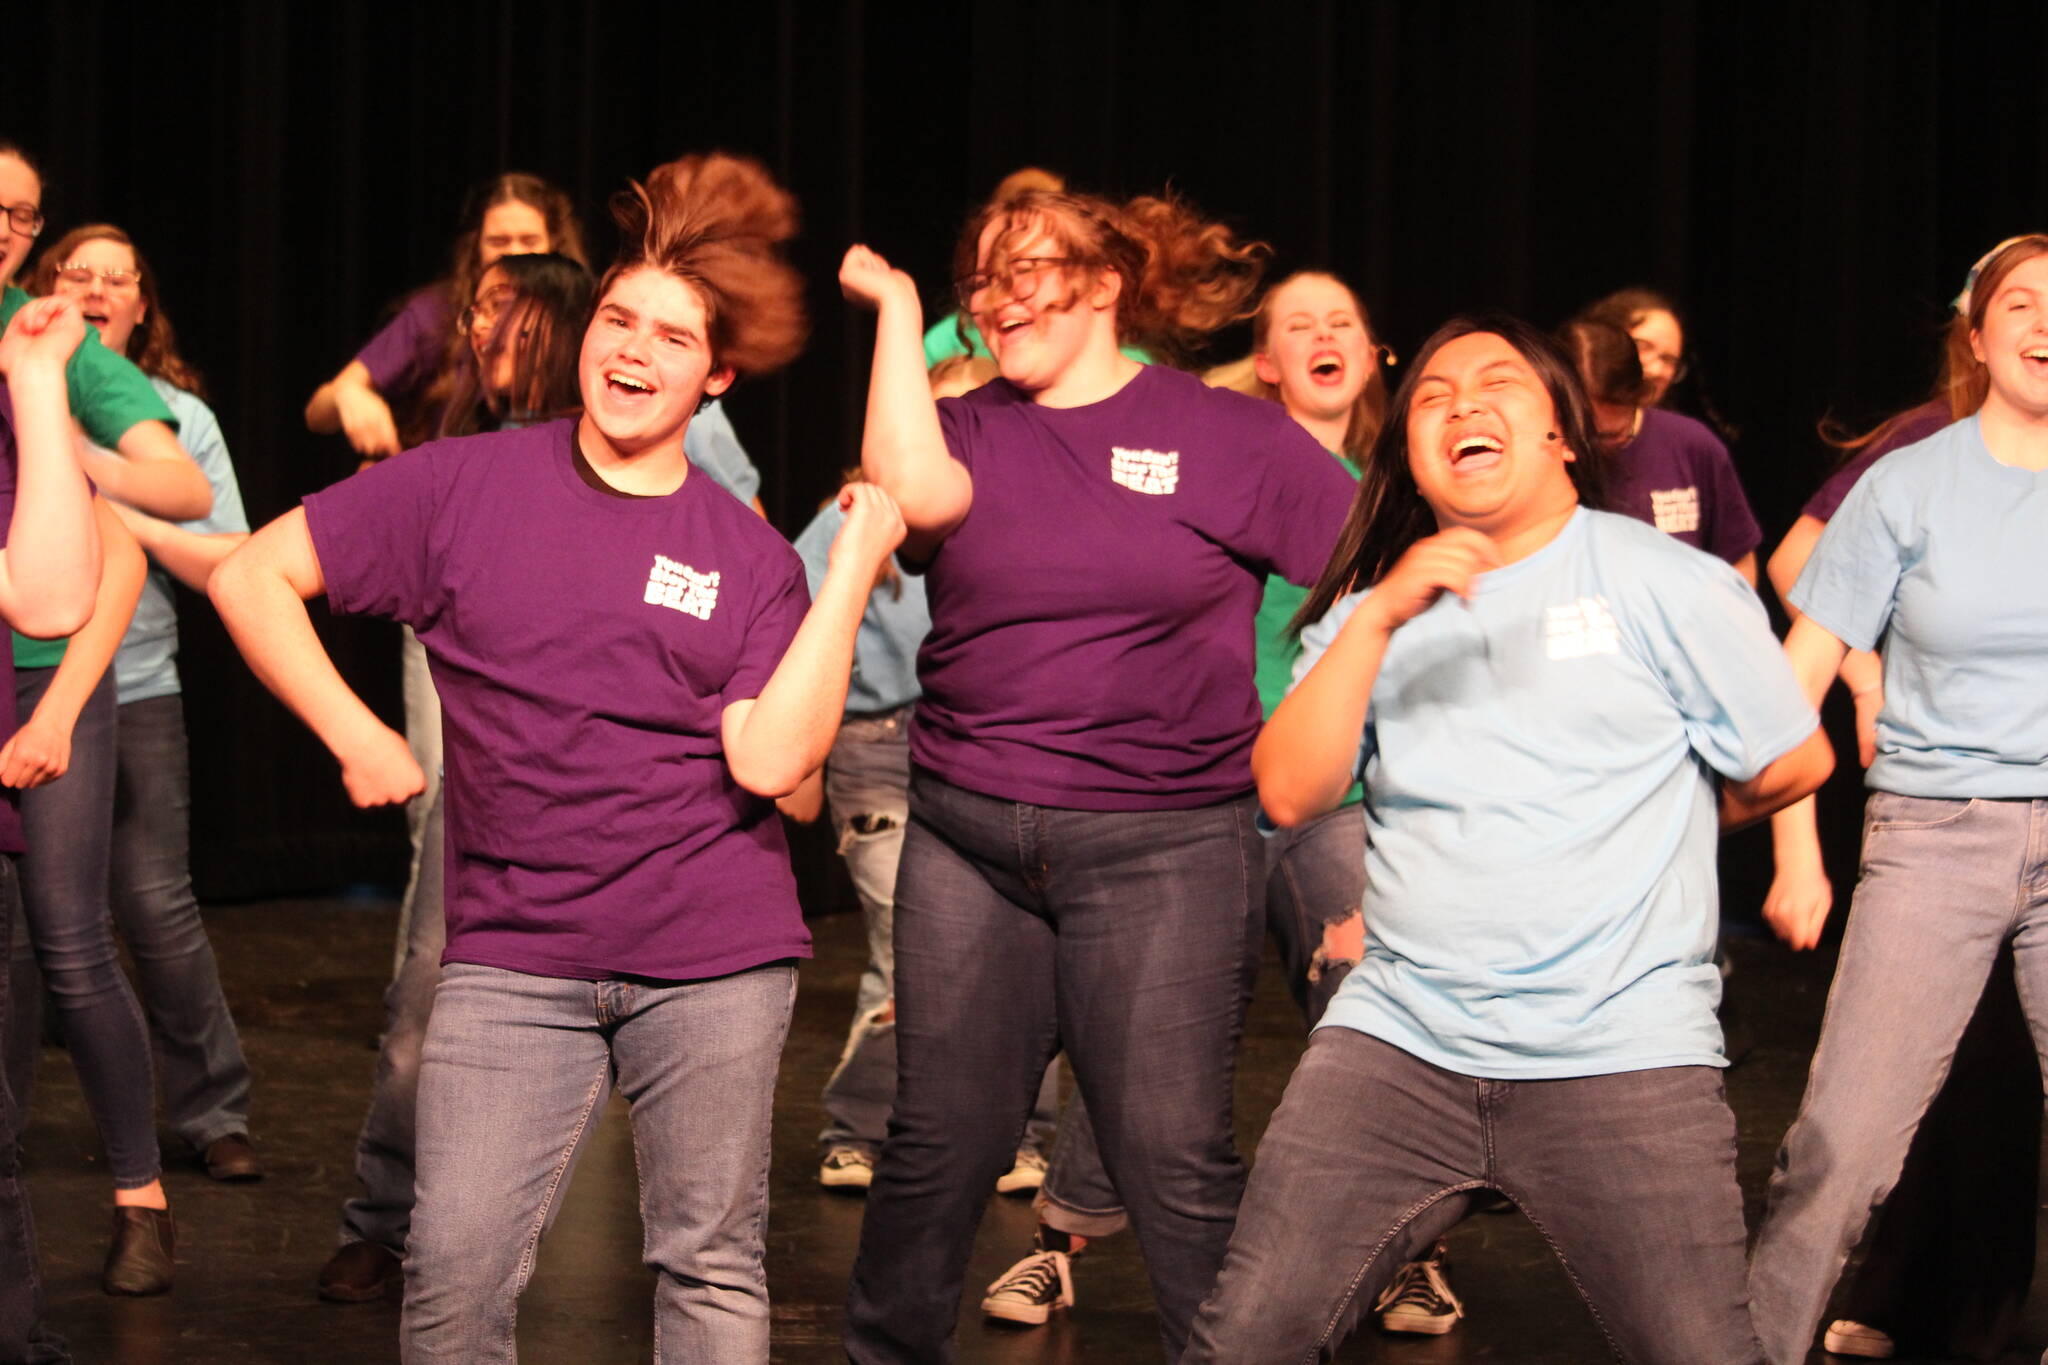 From left, Ash Davis, Alora Van Auken and Jomhel Mendoza dance with the cast in “You Can’t Stop the Beat” from “Hairspray.” (Photo by Karina Andrew/Whidbey News-Times)